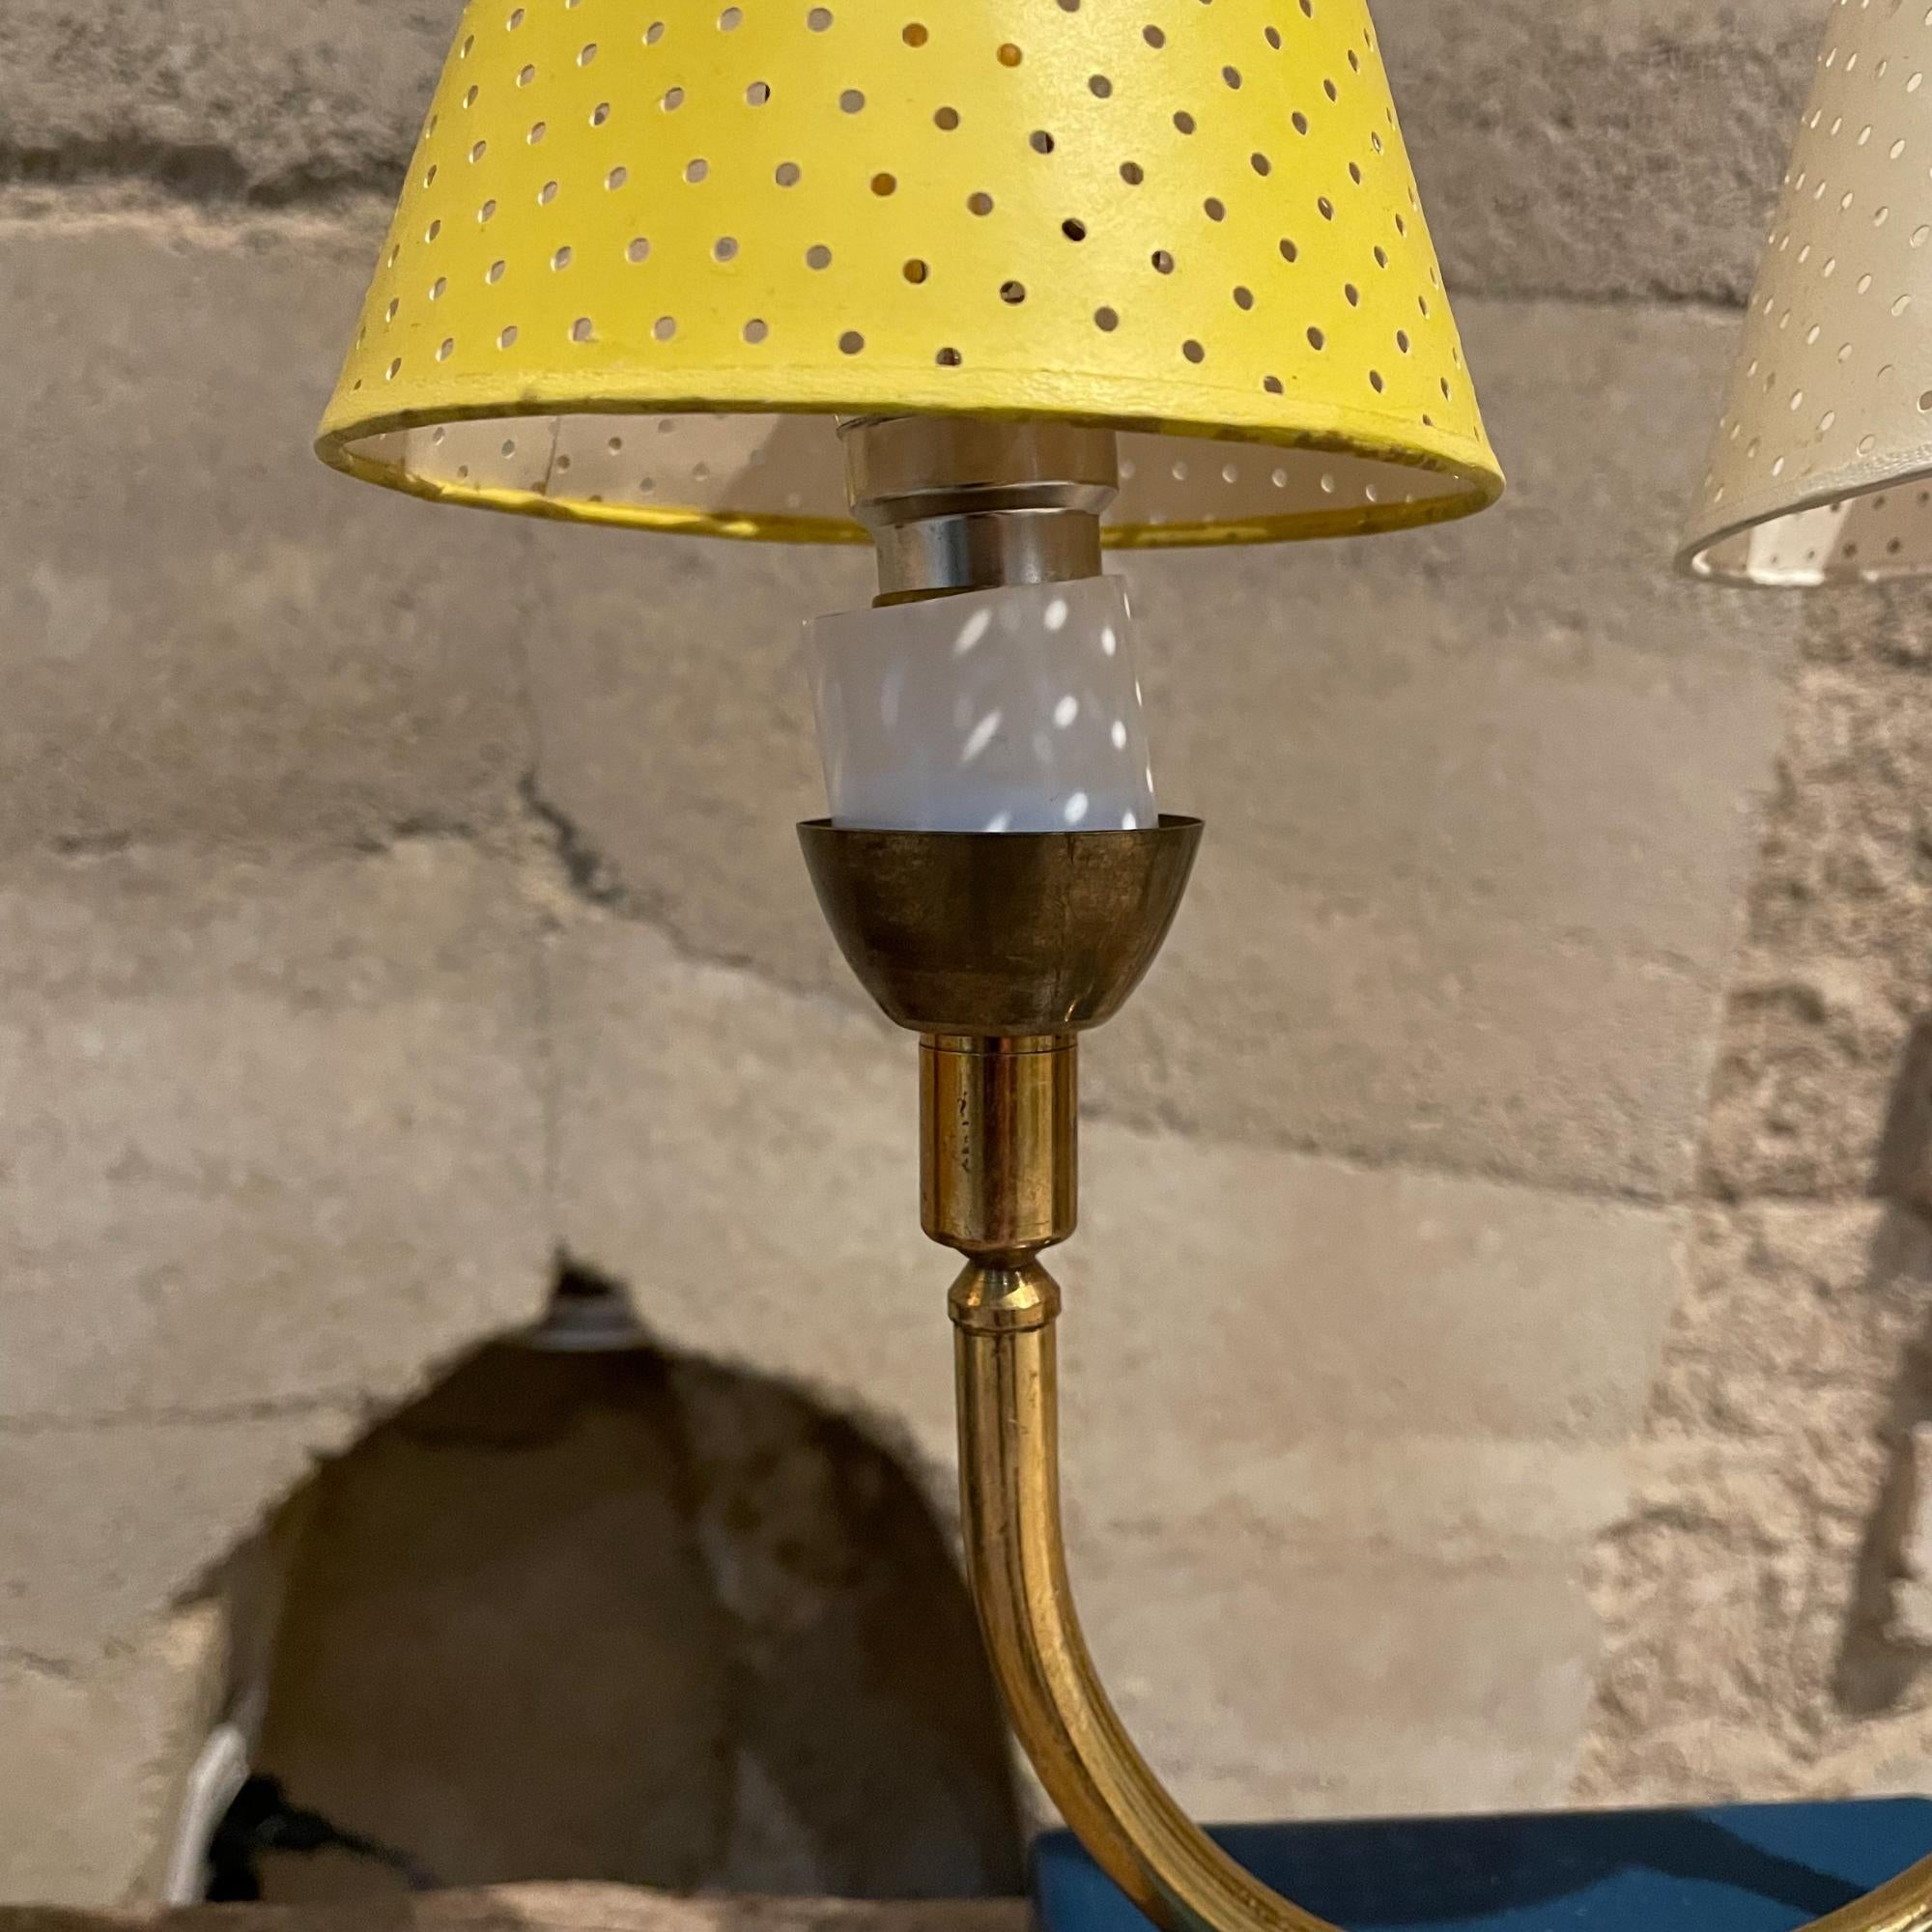 Dainty French pair of table lamps totally French! Vintage from France 1950s
Brass on blue painted metal wood base platform presentation -simply delightful pair of lamps.
Two lights each lamp -comes with perforated paper shades in white and yellow